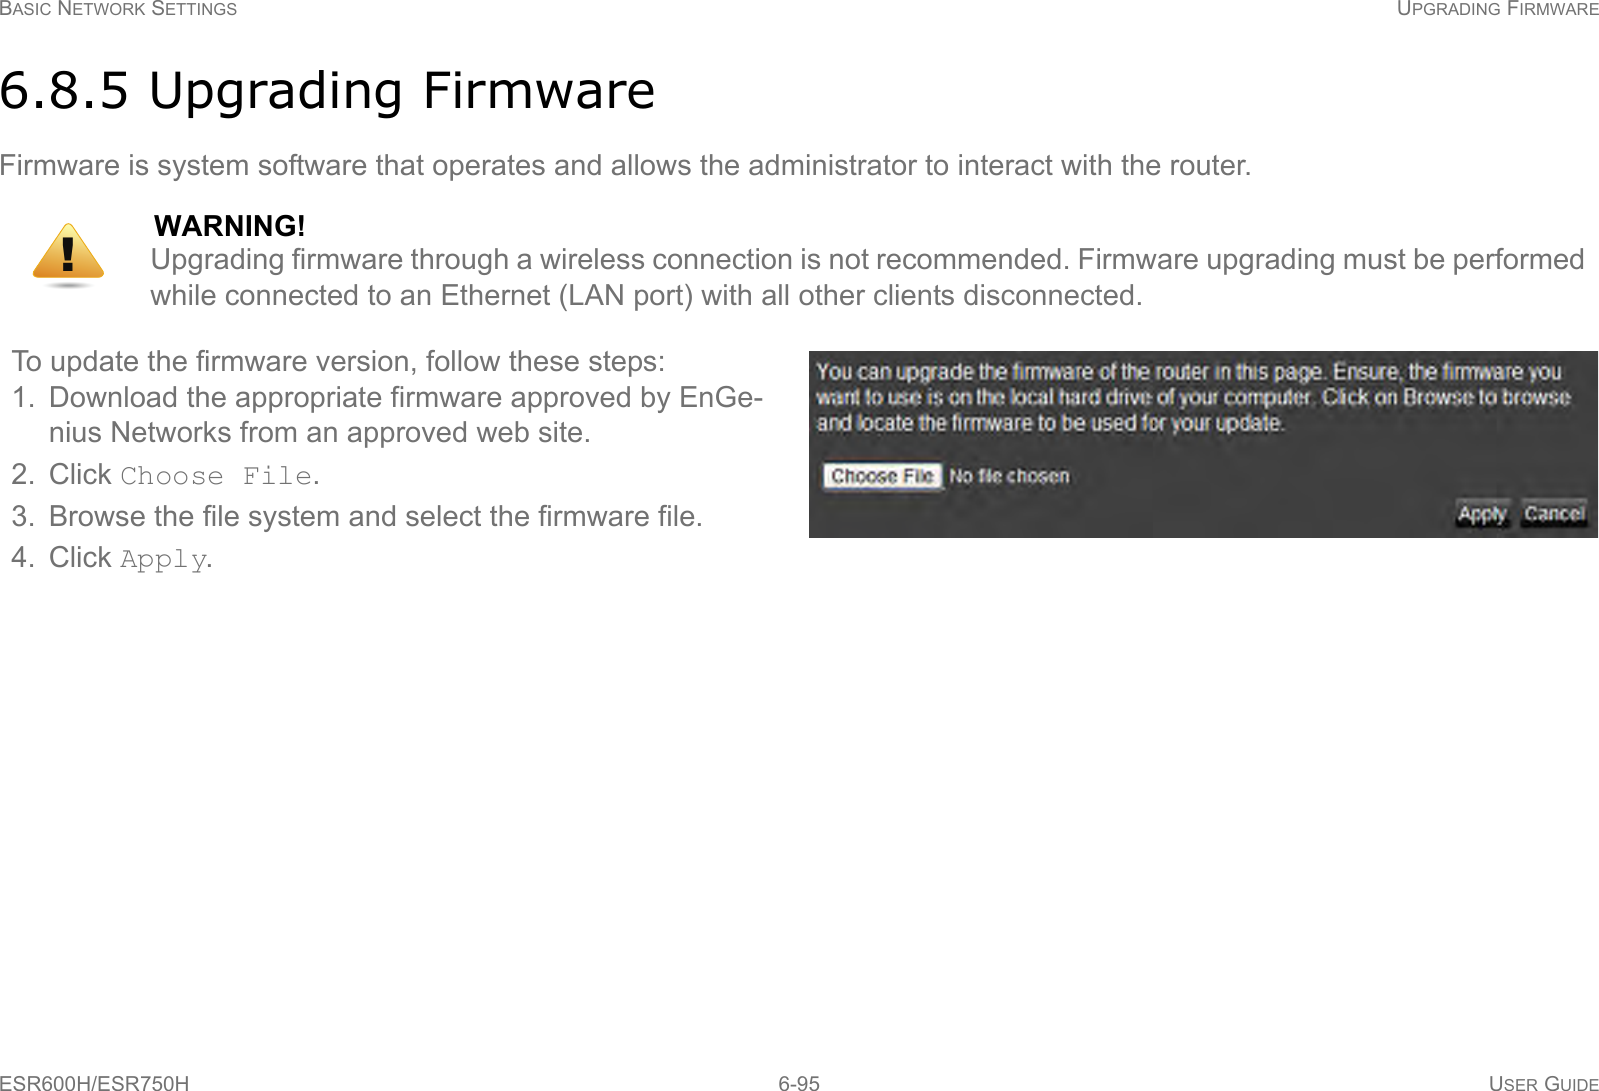 BASIC NETWORK SETTINGS UPGRADING FIRMWAREESR600H/ESR750H 6-95 USER GUIDE6.8.5 Upgrading FirmwareFirmware is system software that operates and allows the administrator to interact with the router.WARNING!Upgrading firmware through a wireless connection is not recommended. Firmware upgrading must be performed while connected to an Ethernet (LAN port) with all other clients disconnected.To update the firmware version, follow these steps:1. Download the appropriate firmware approved by EnGe-nius Networks from an approved web site.2. Click Choose File.3. Browse the file system and select the firmware file.4. Click Apply.!